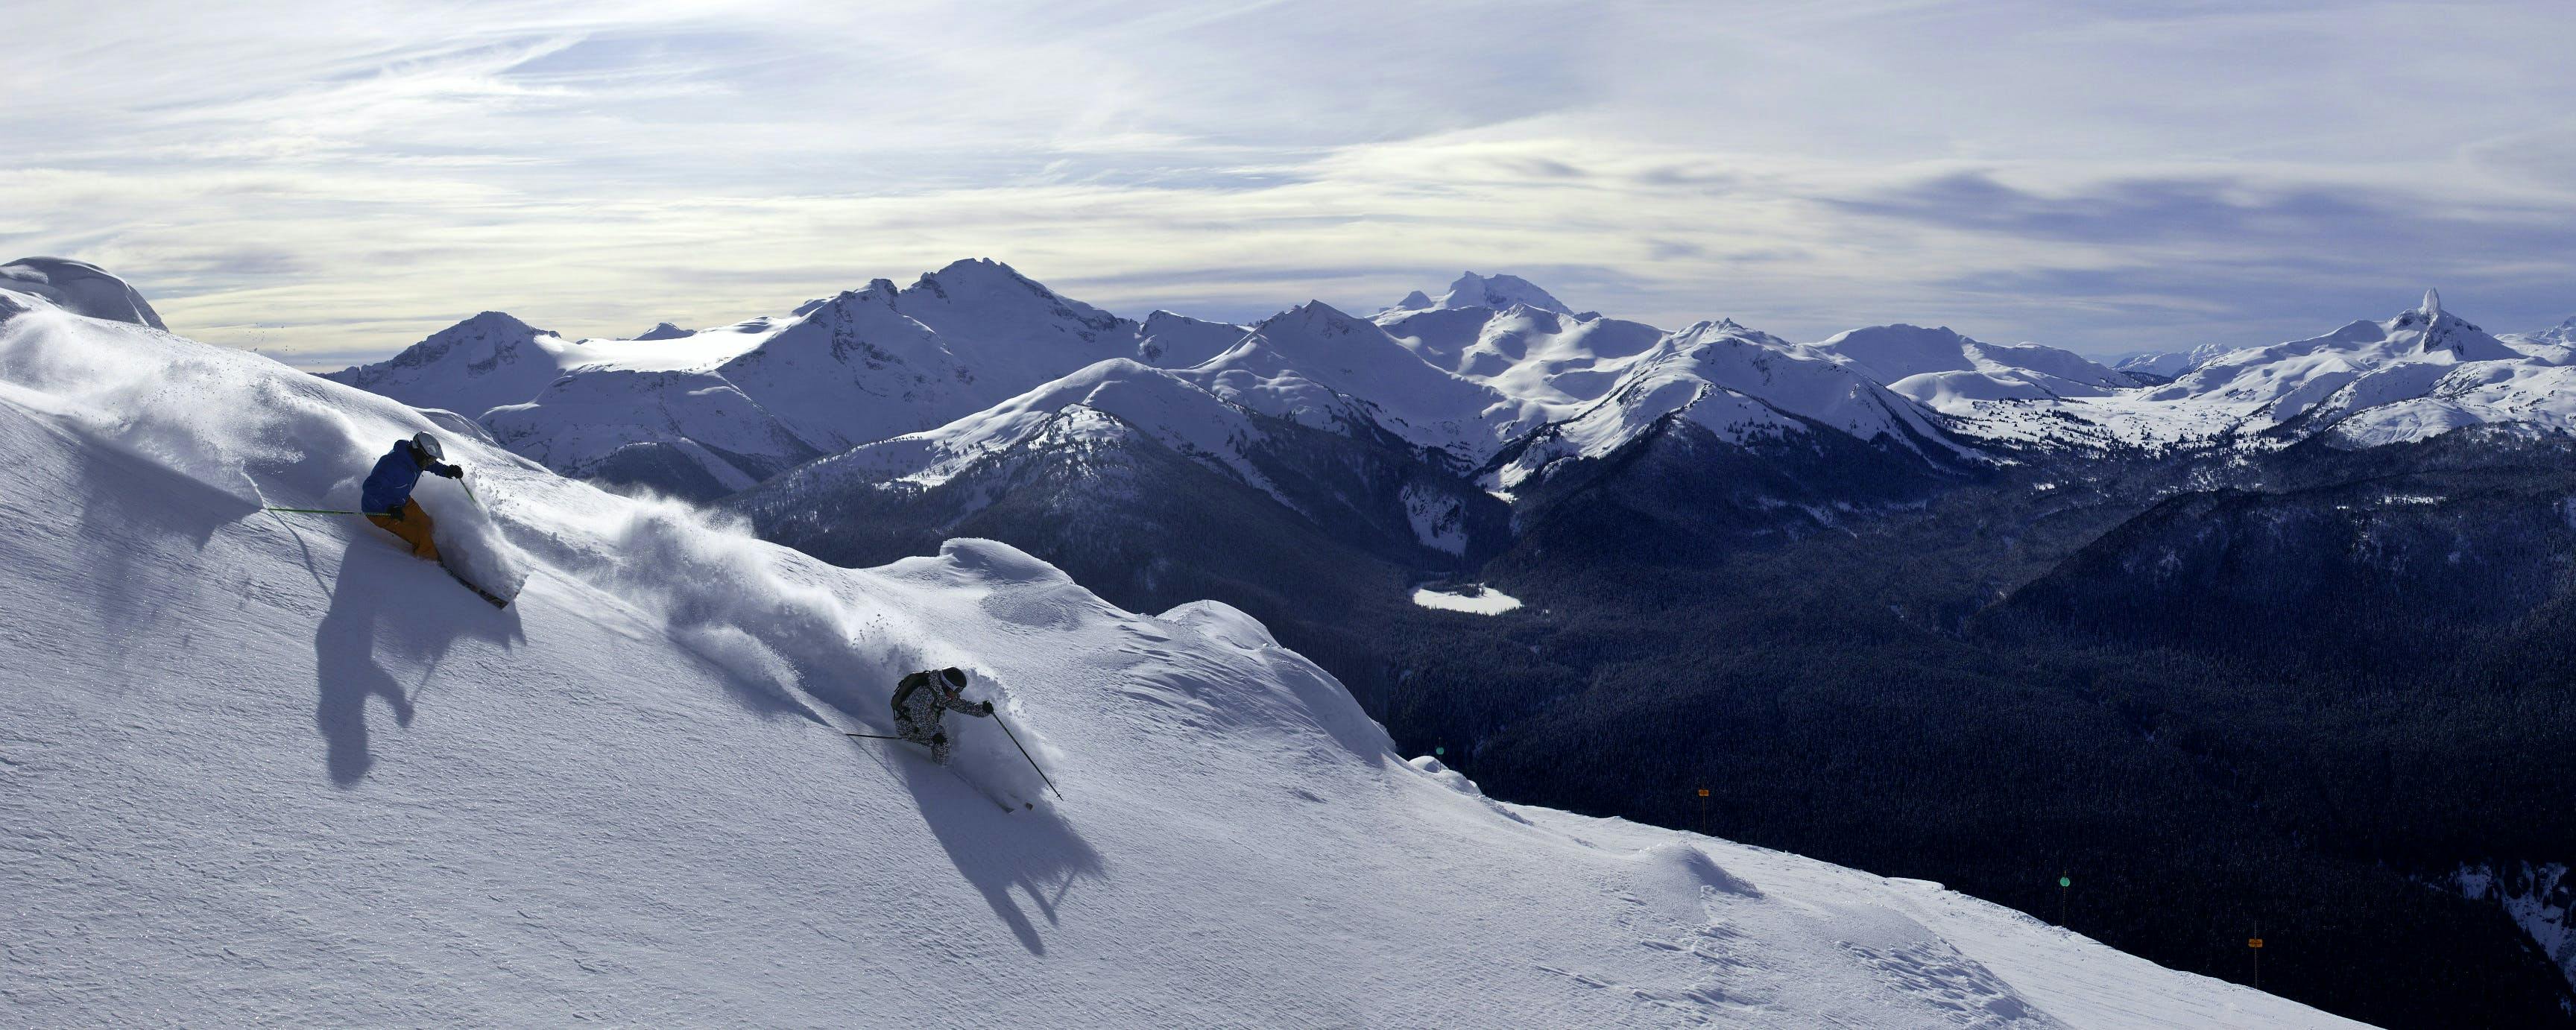 A local’s guide to skiing and riding at Whistler Blackcomb